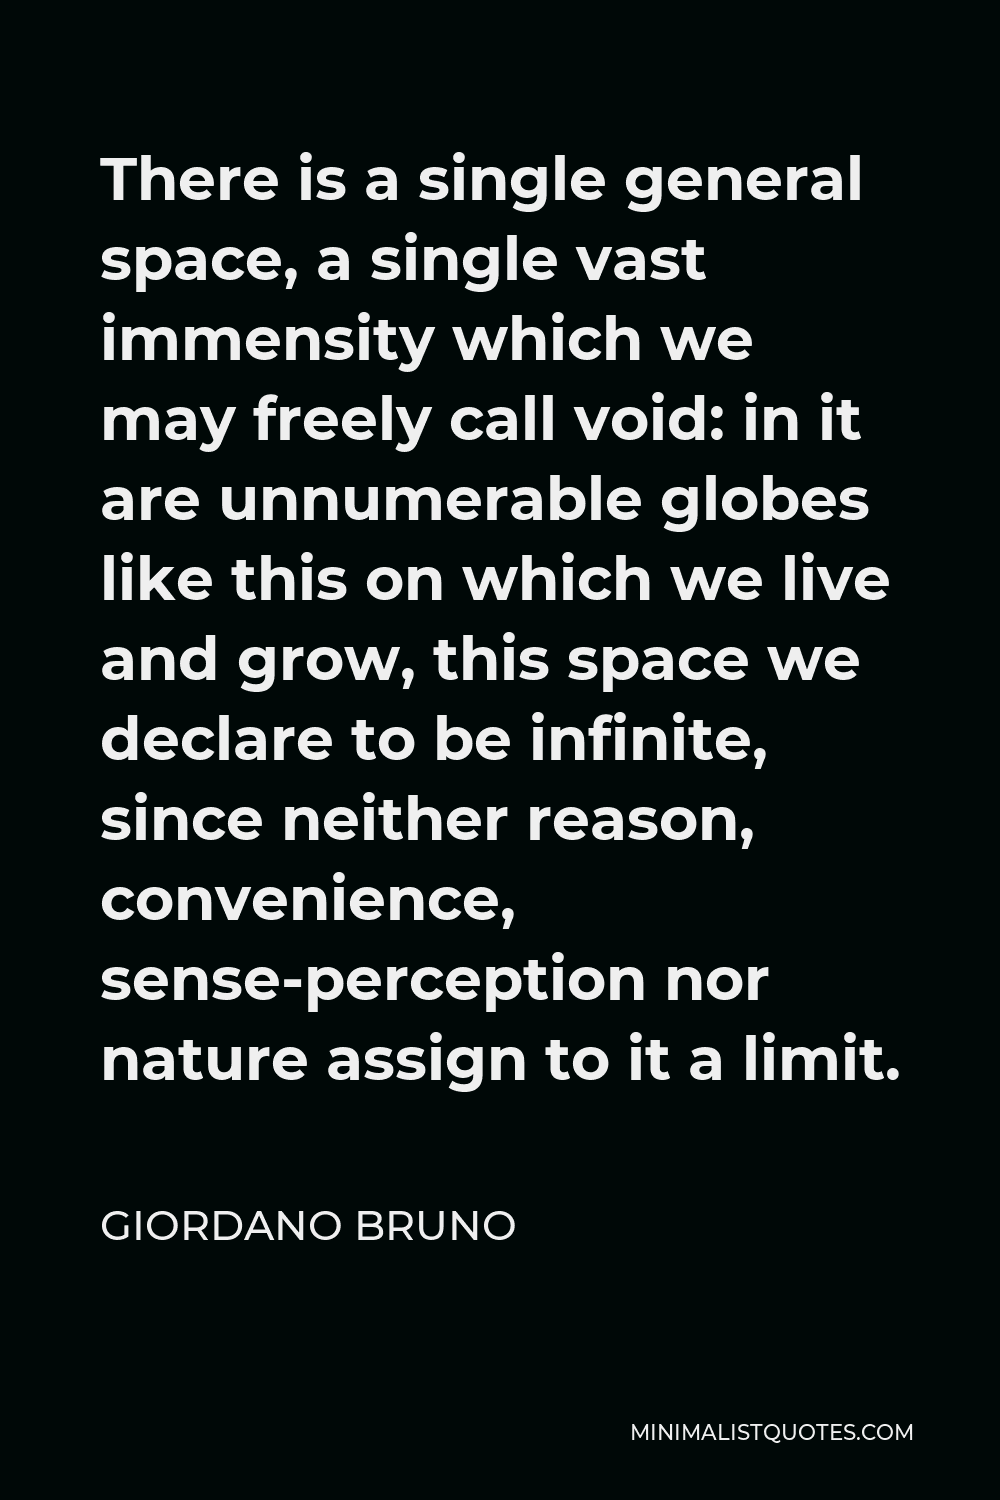 Giordano Bruno Quote - There is a single general space, a single vast immensity which we may freely call void: in it are unnumerable globes like this on which we live and grow, this space we declare to be infinite, since neither reason, convenience, sense-perception nor nature assign to it a limit.